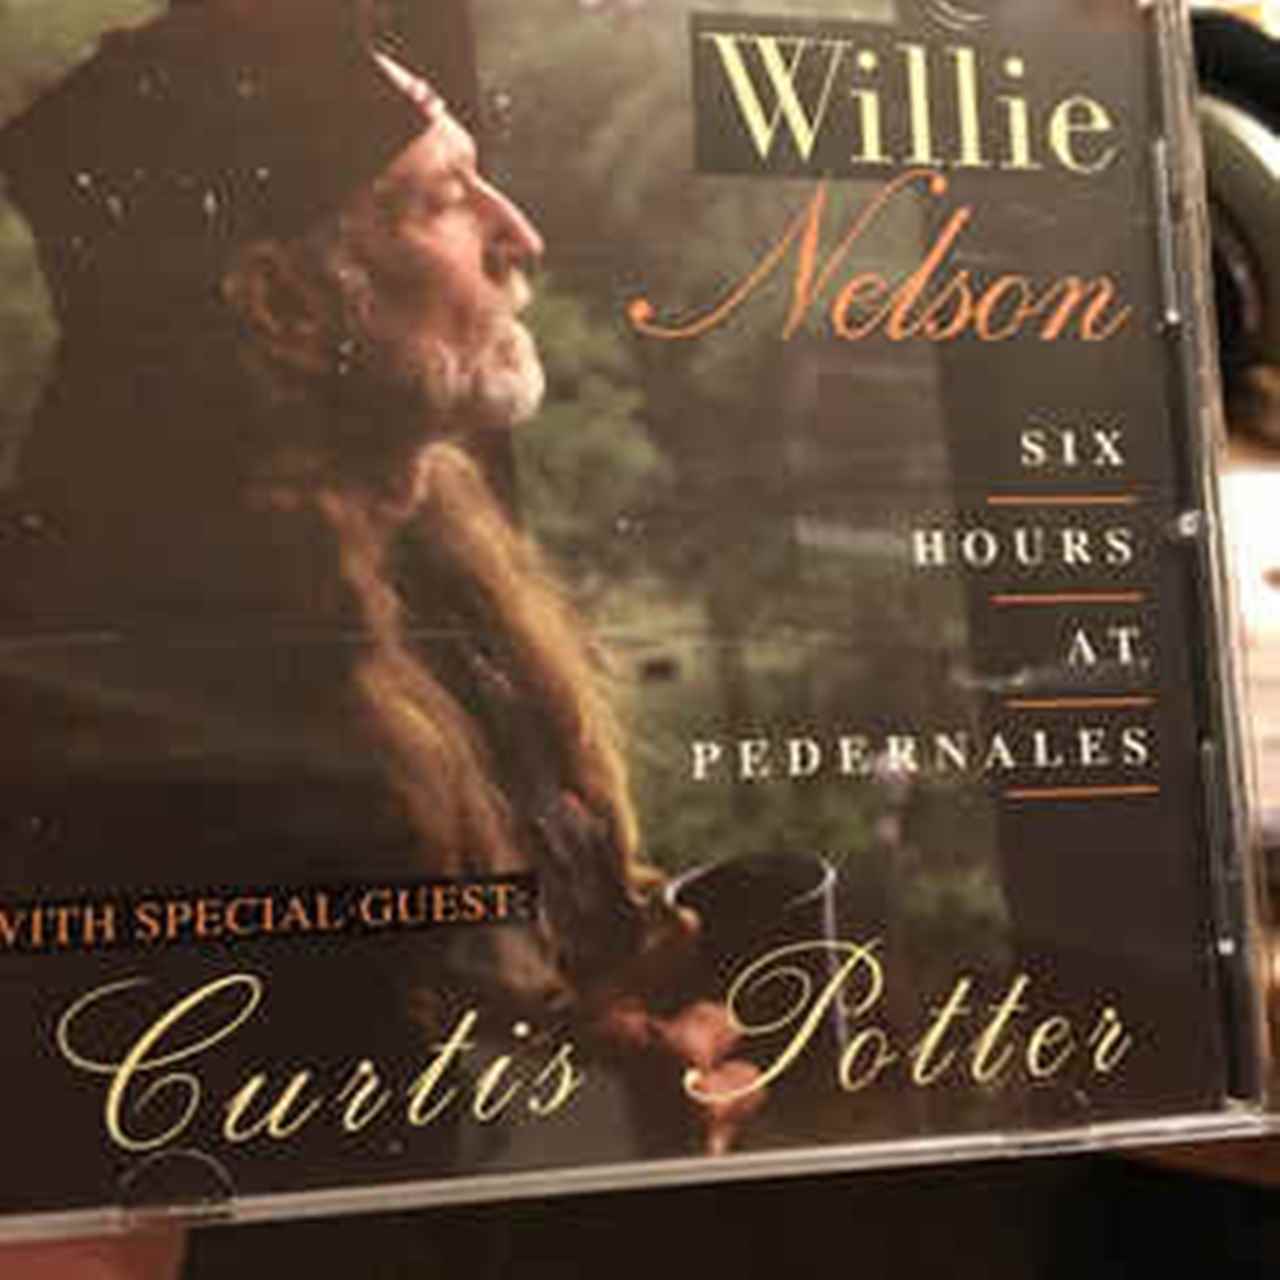 Willie Nelson – Six Hours At Pedernales cover album